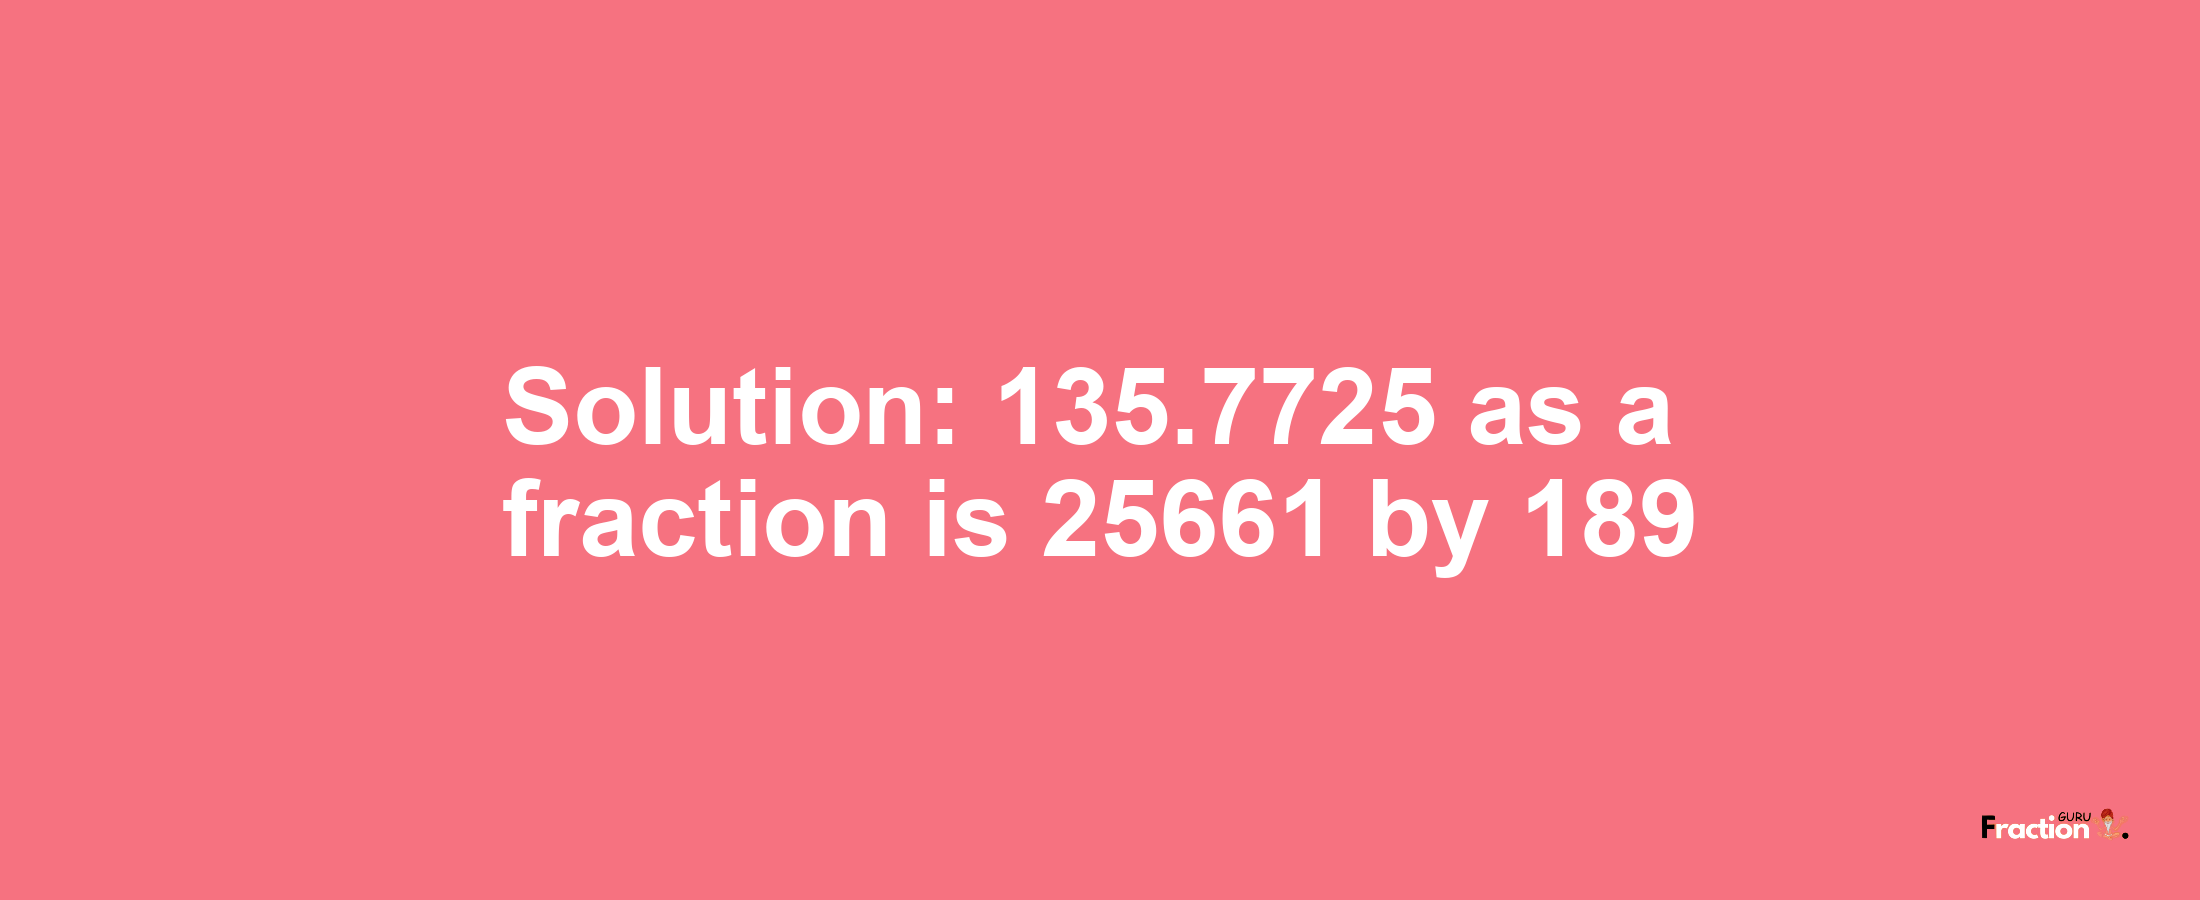 Solution:135.7725 as a fraction is 25661/189